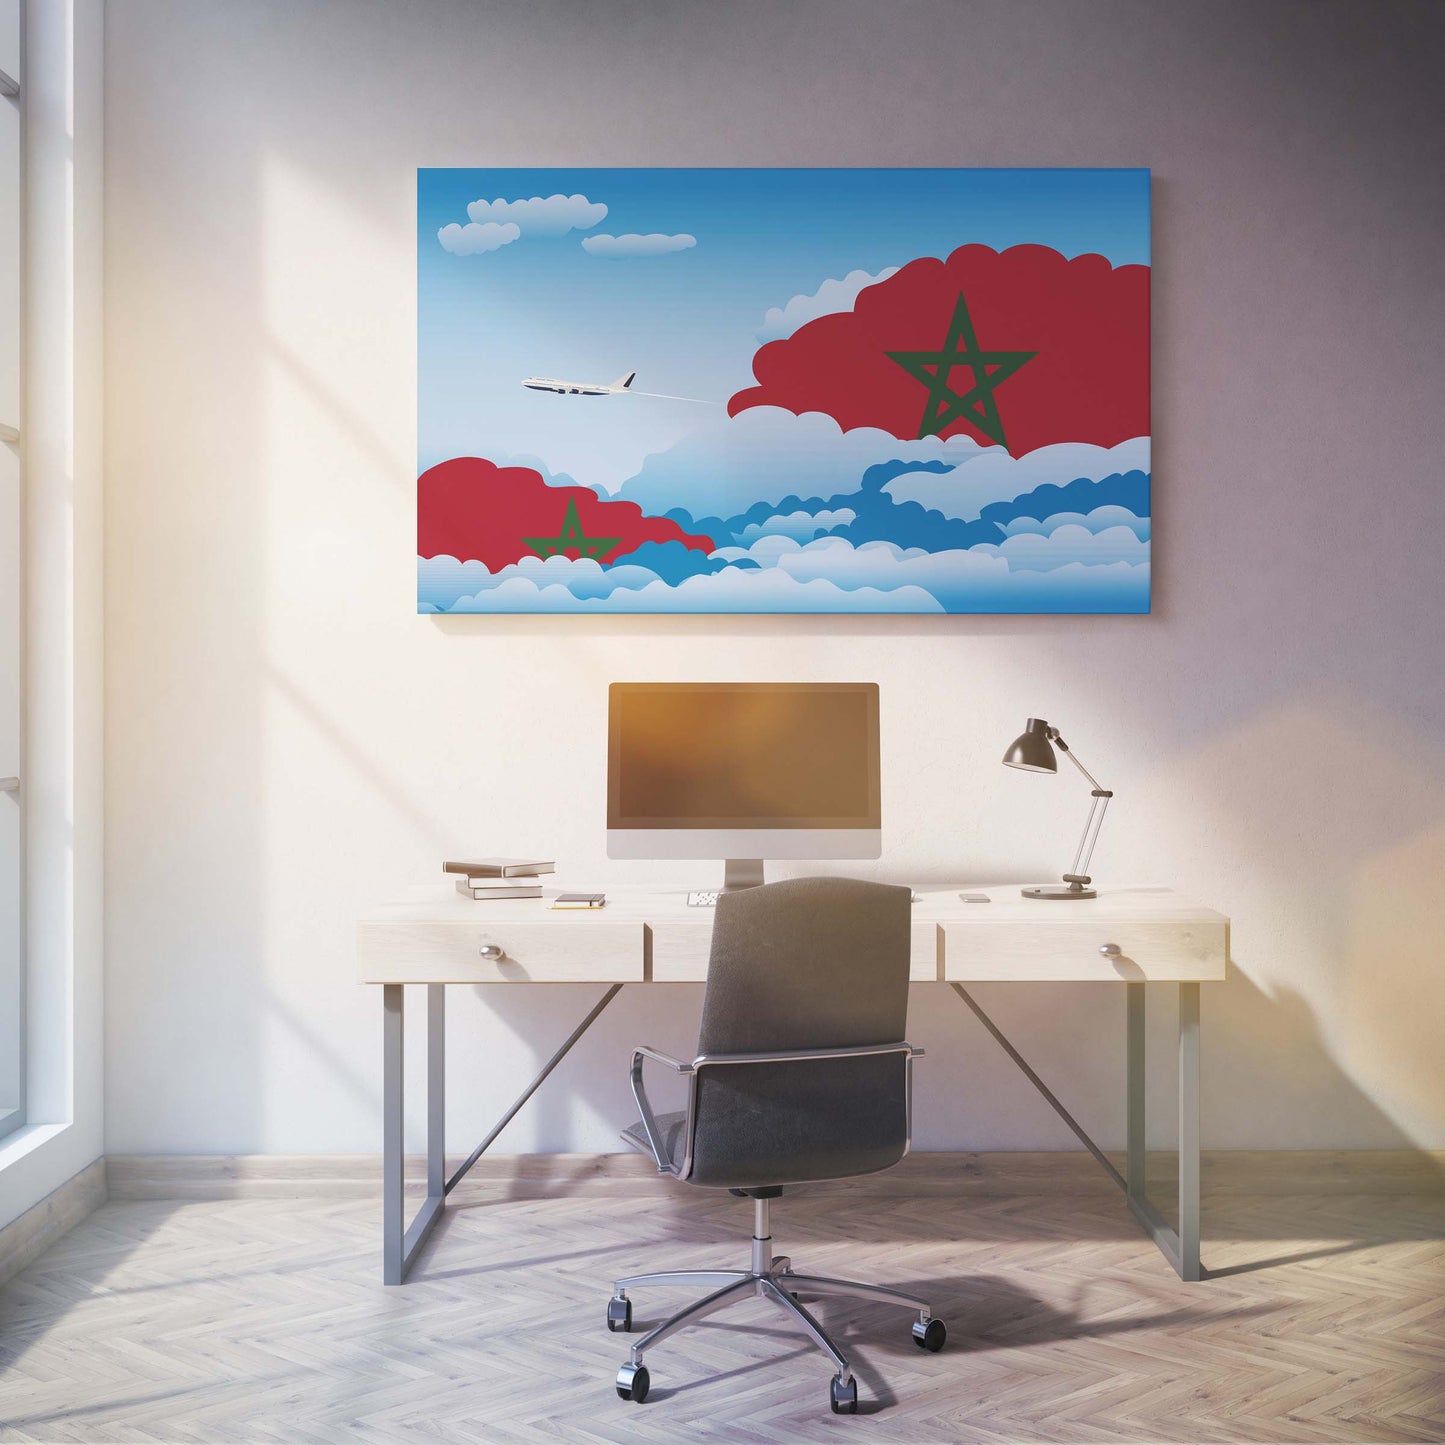 Morocco Flags Day Clouds Canvas Print Framed